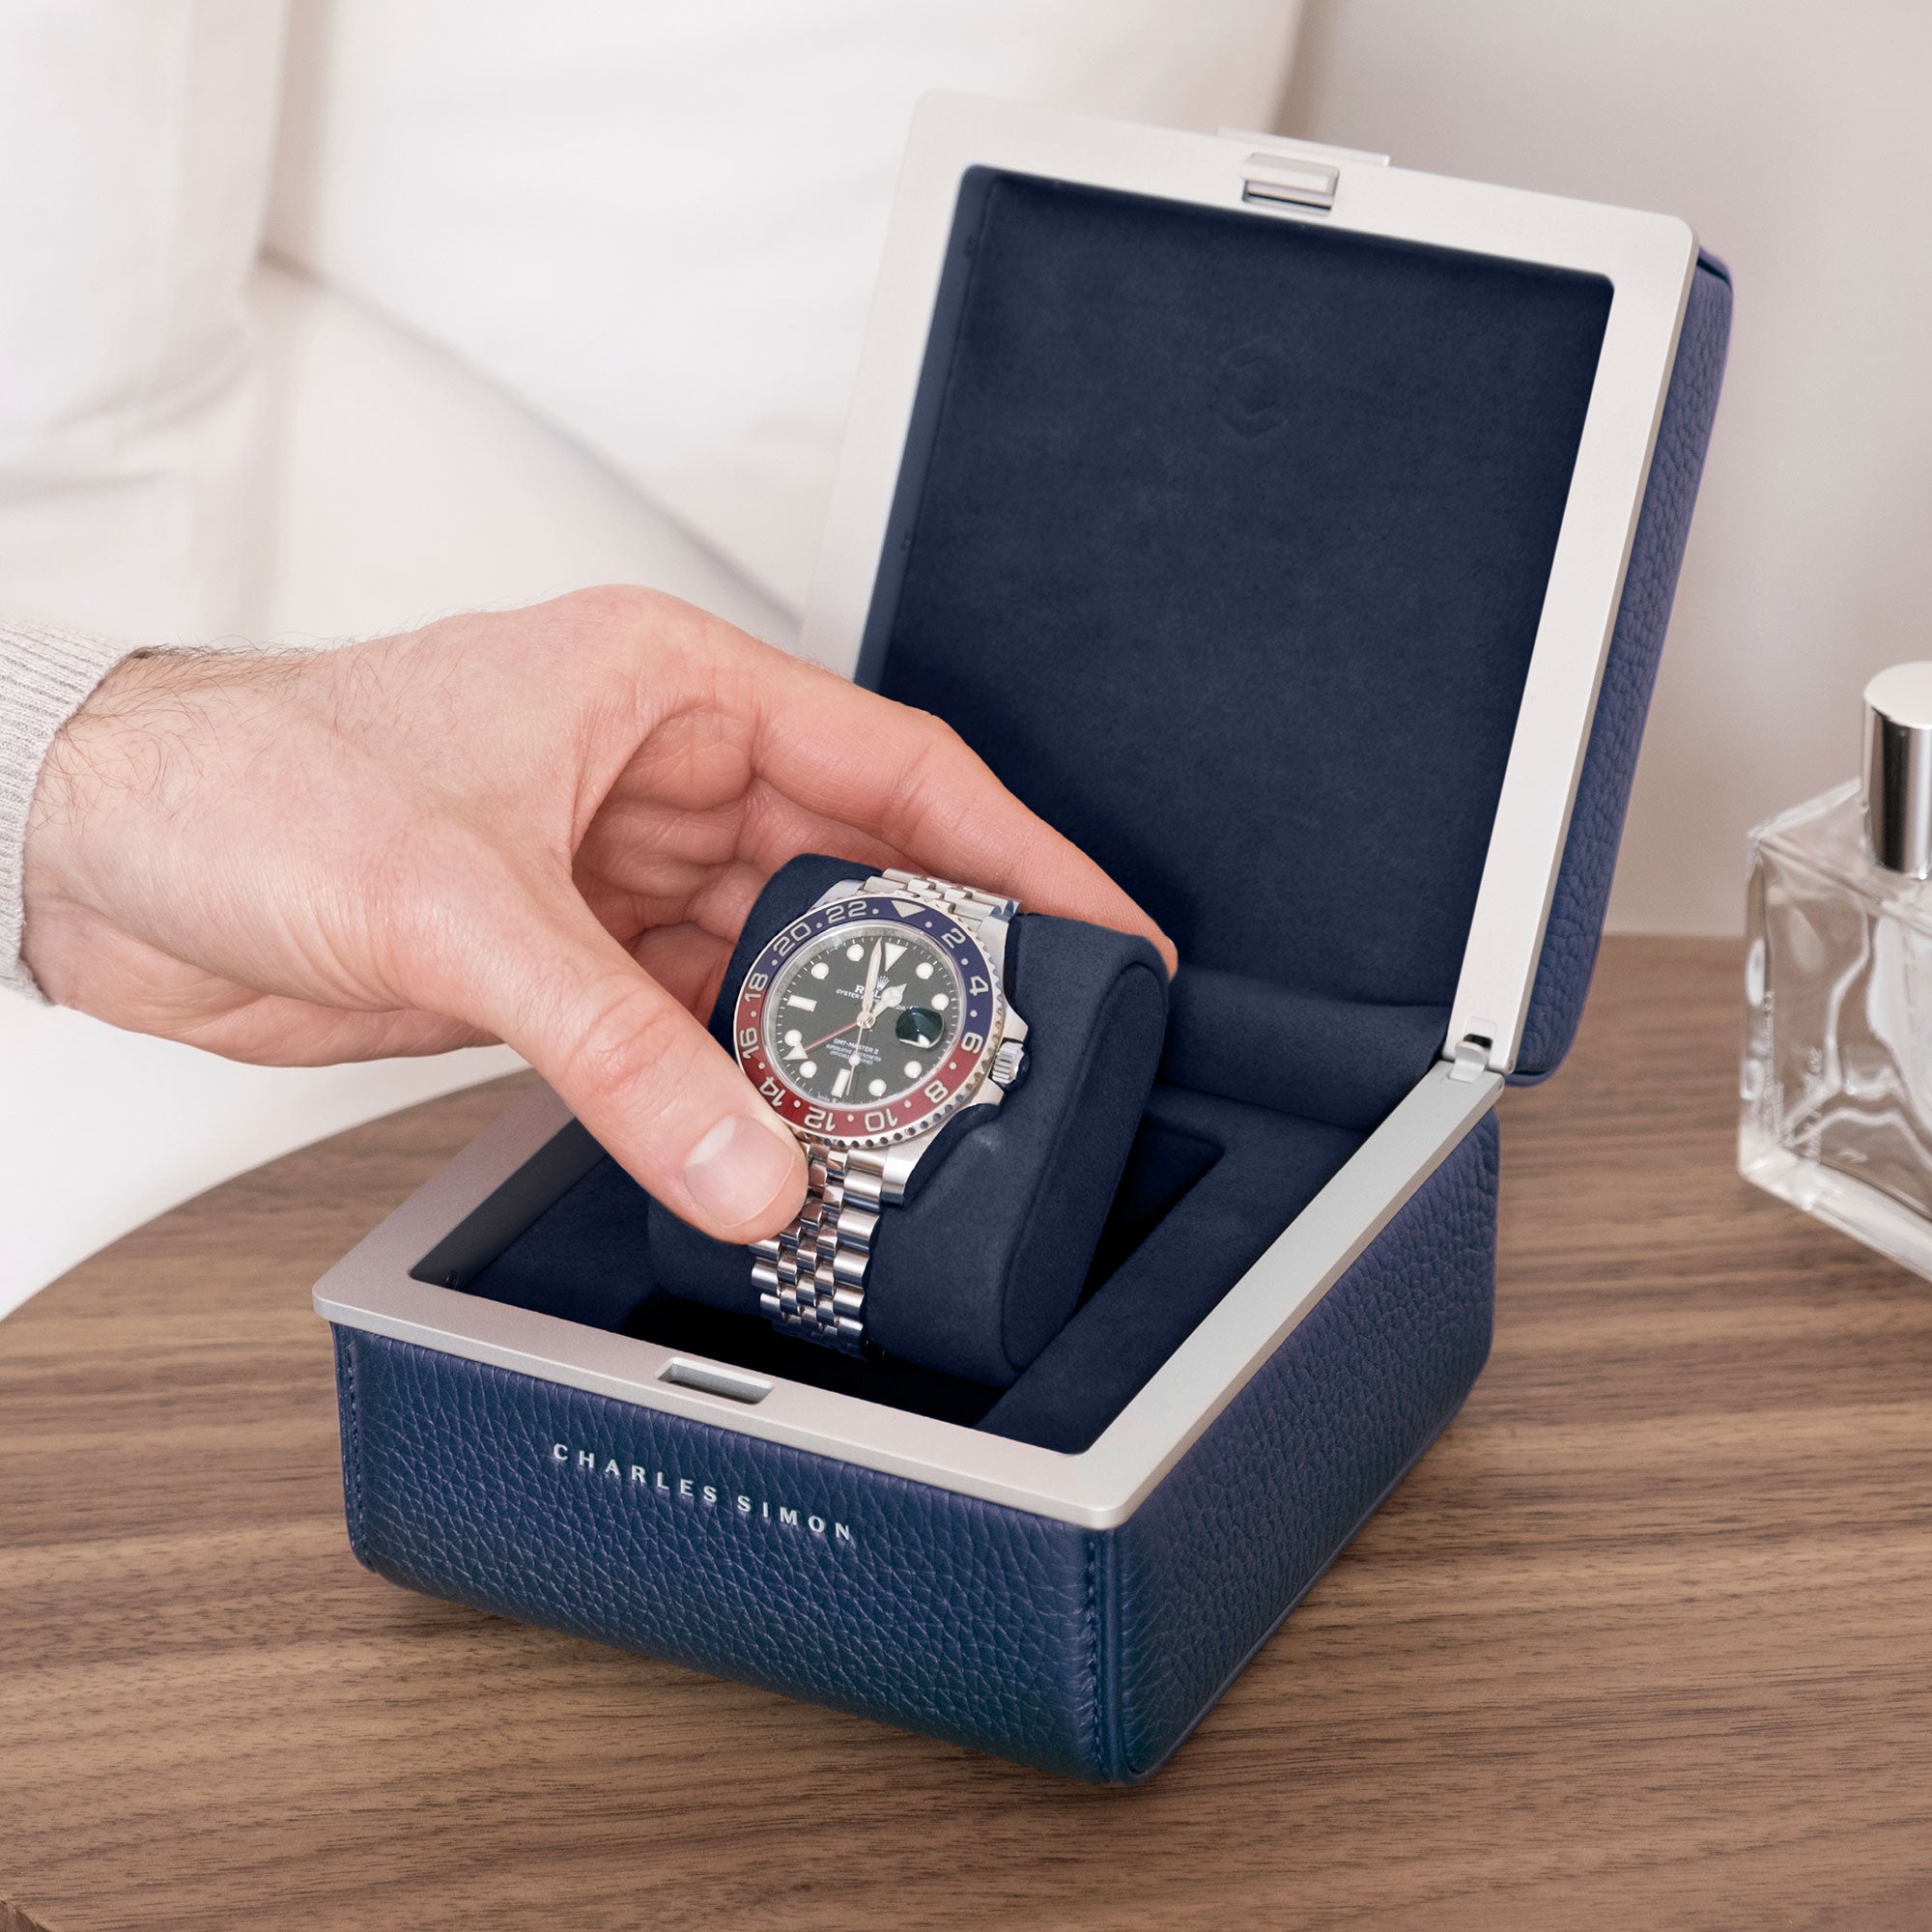 Lifestyle photo of sapphire Eaton 1 watch case on modern nightstand. Man is opening luxury watch case with Rolex Pepsi placed on deep blue removable watch cushion.